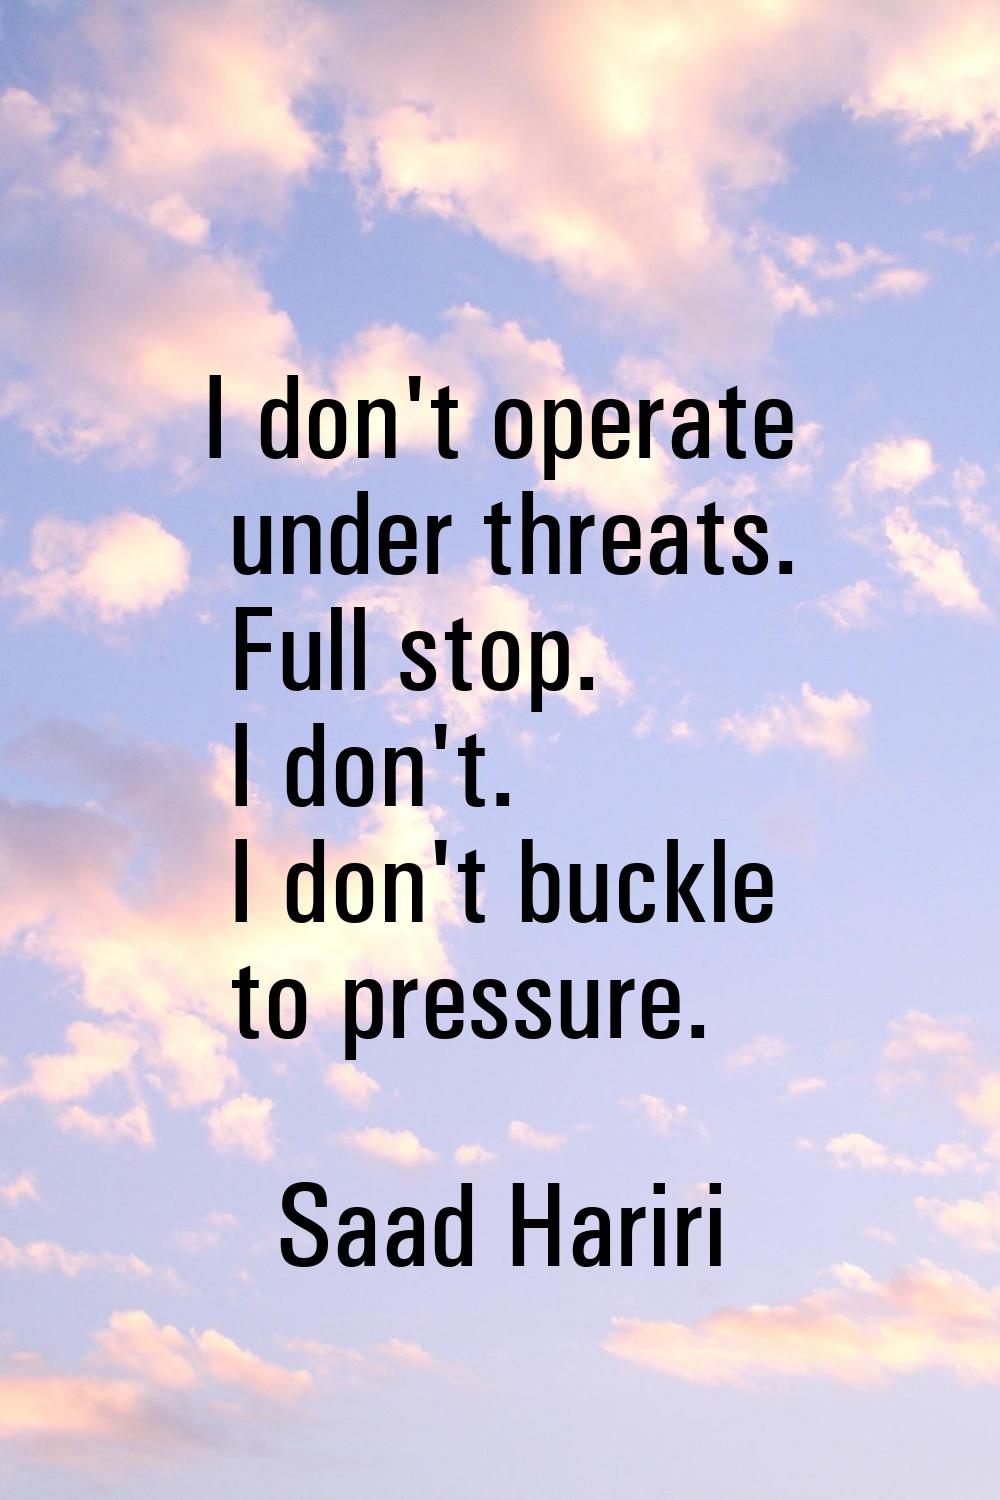 I don't operate under threats. Full stop. I don't. I don't buckle to pressure.